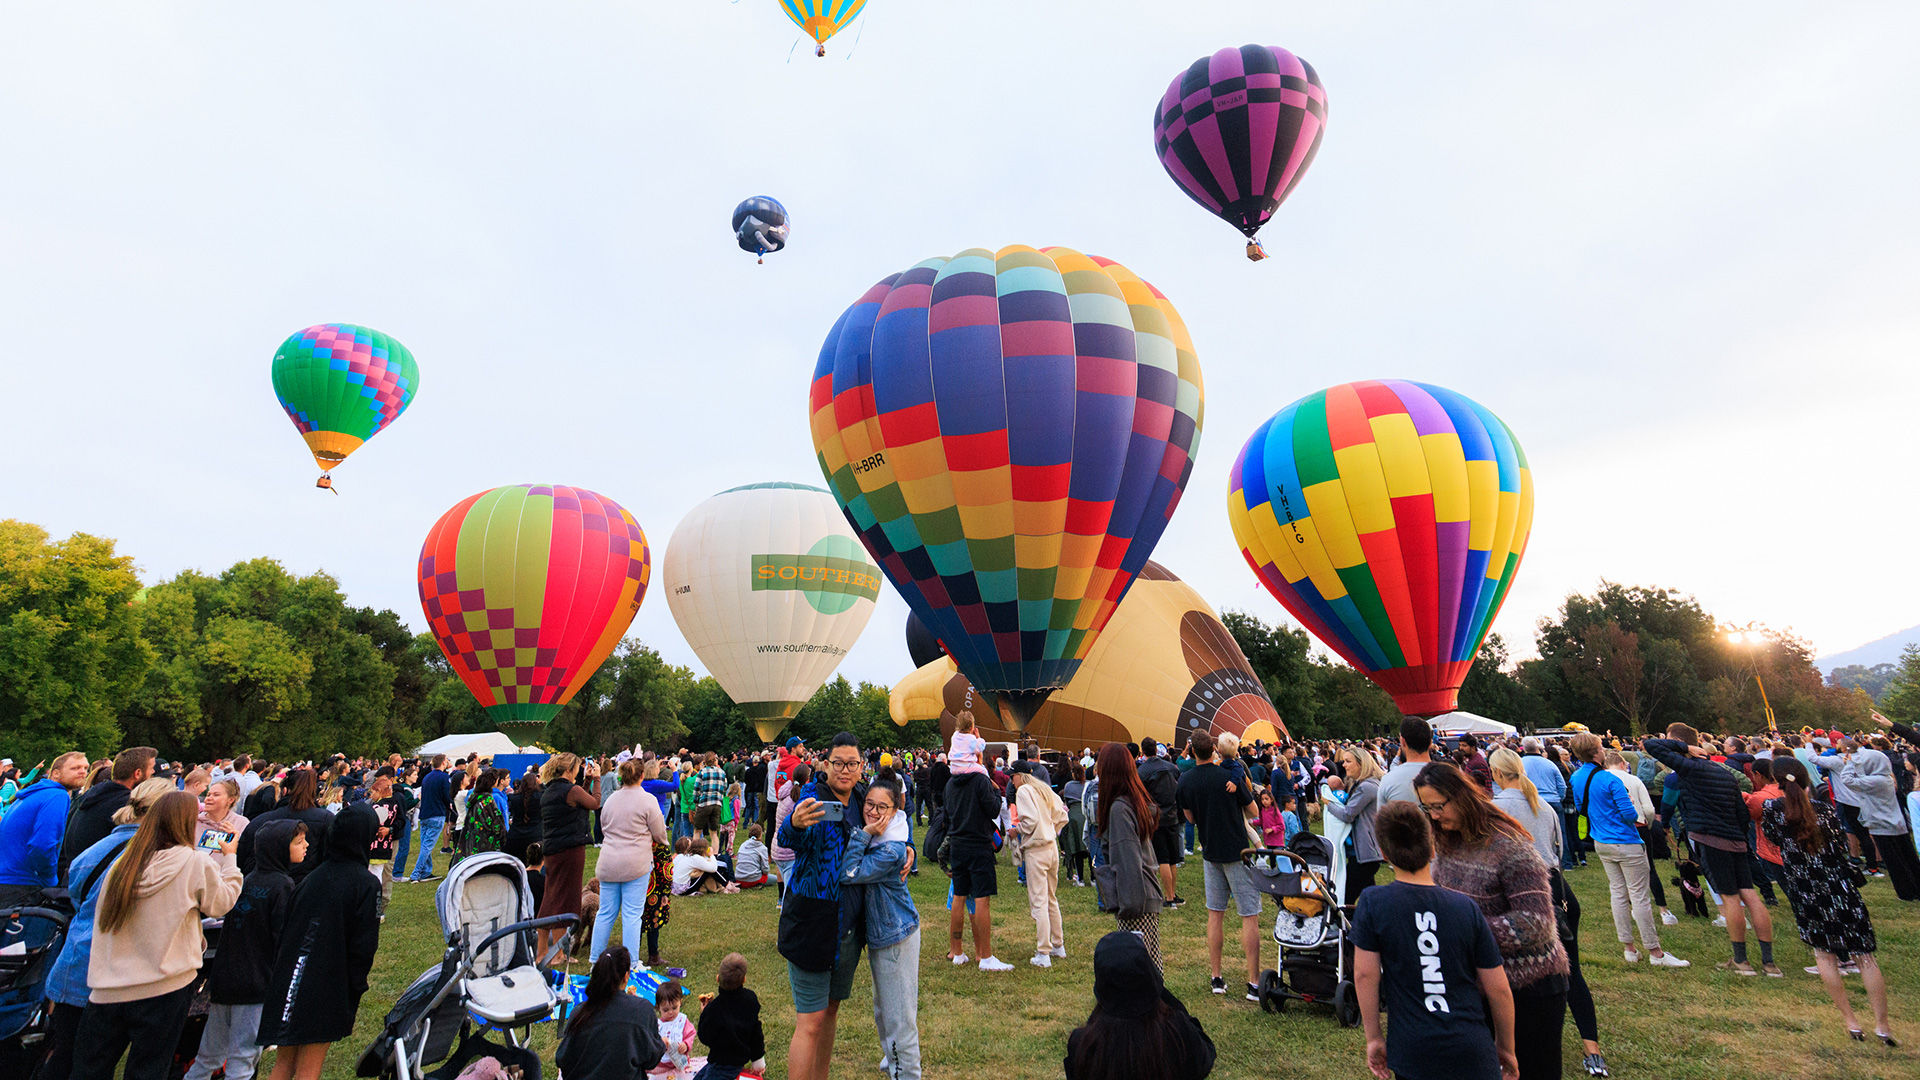 A large crowd stands around looking at a range of colourful hot air balloons.